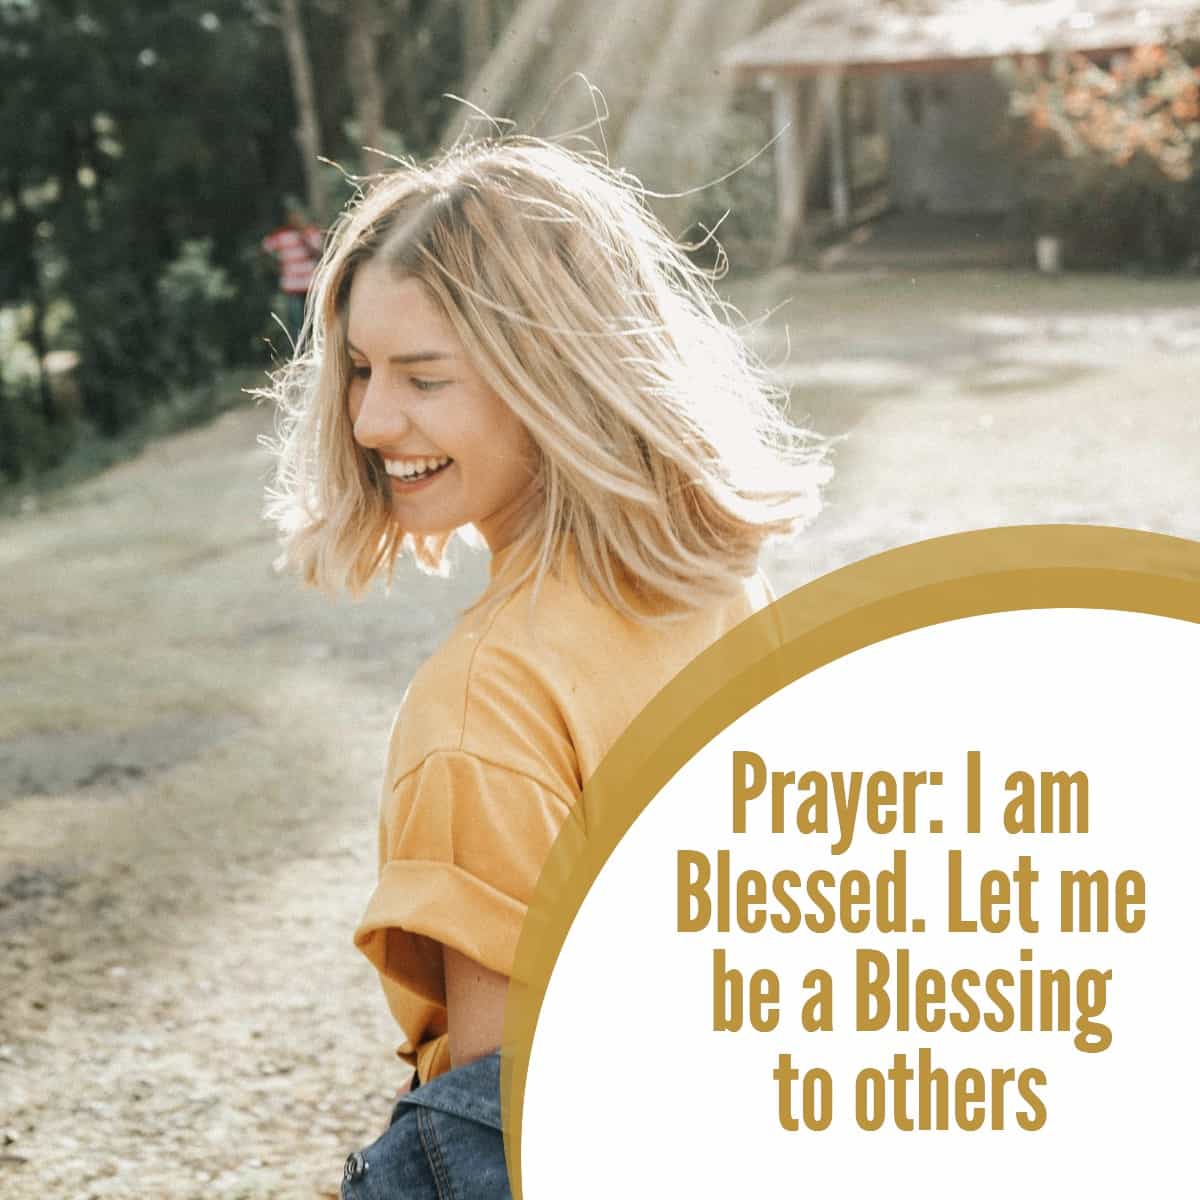 Prayer: I am Blessed. Let me be a Blessing to others